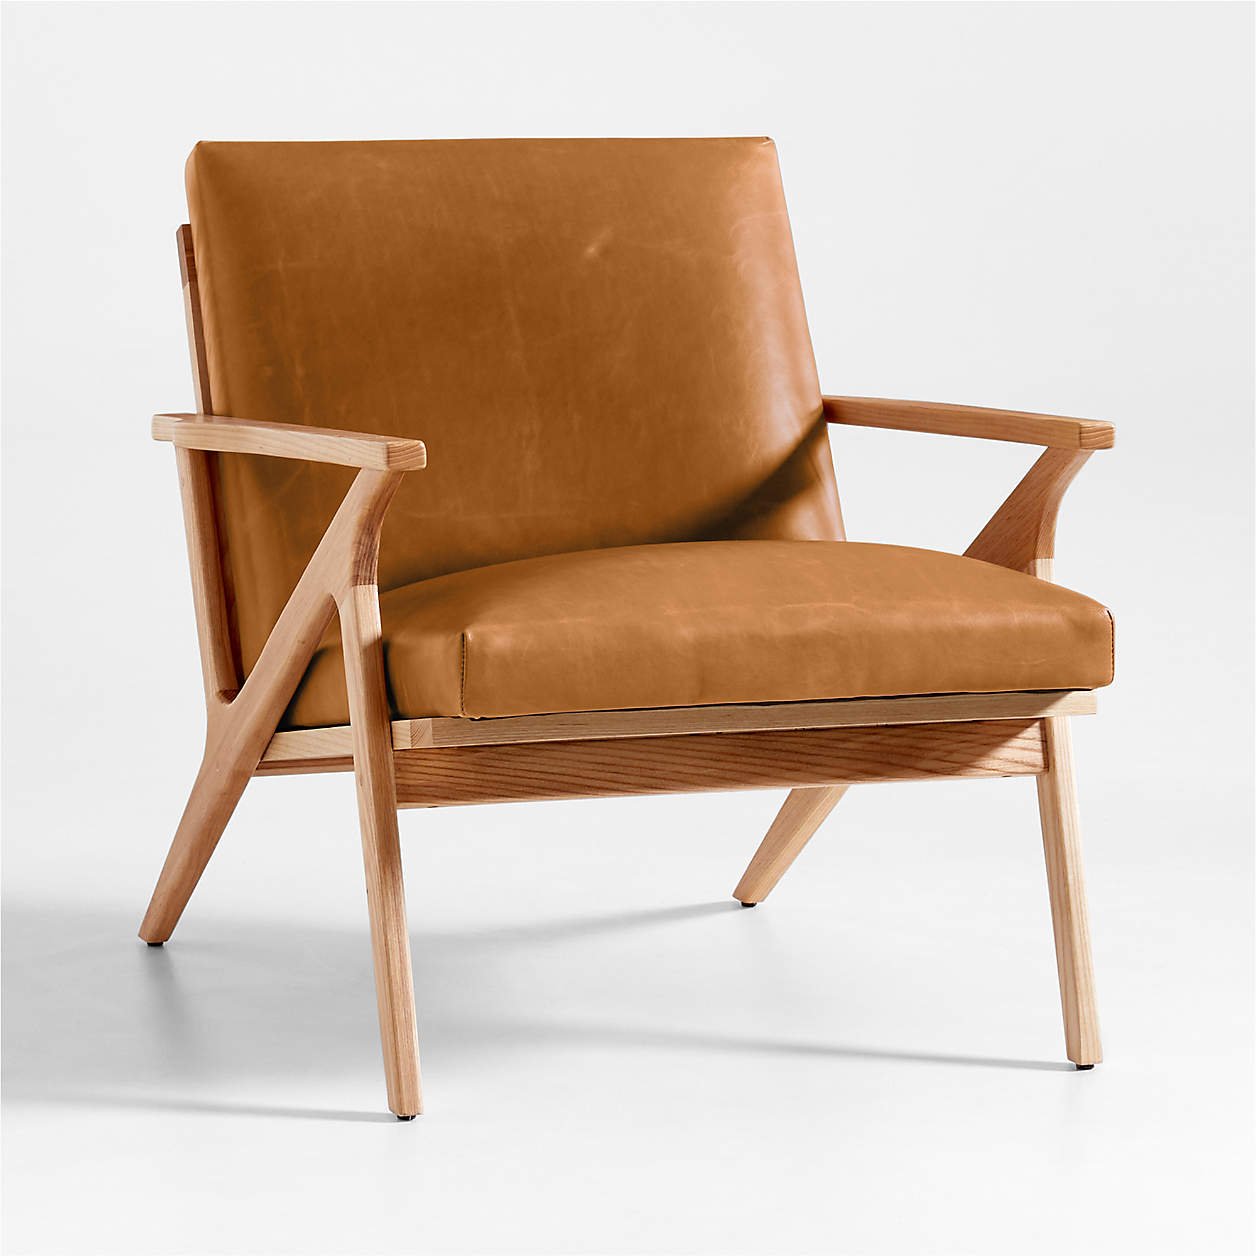 Ash Wood Leather Chair